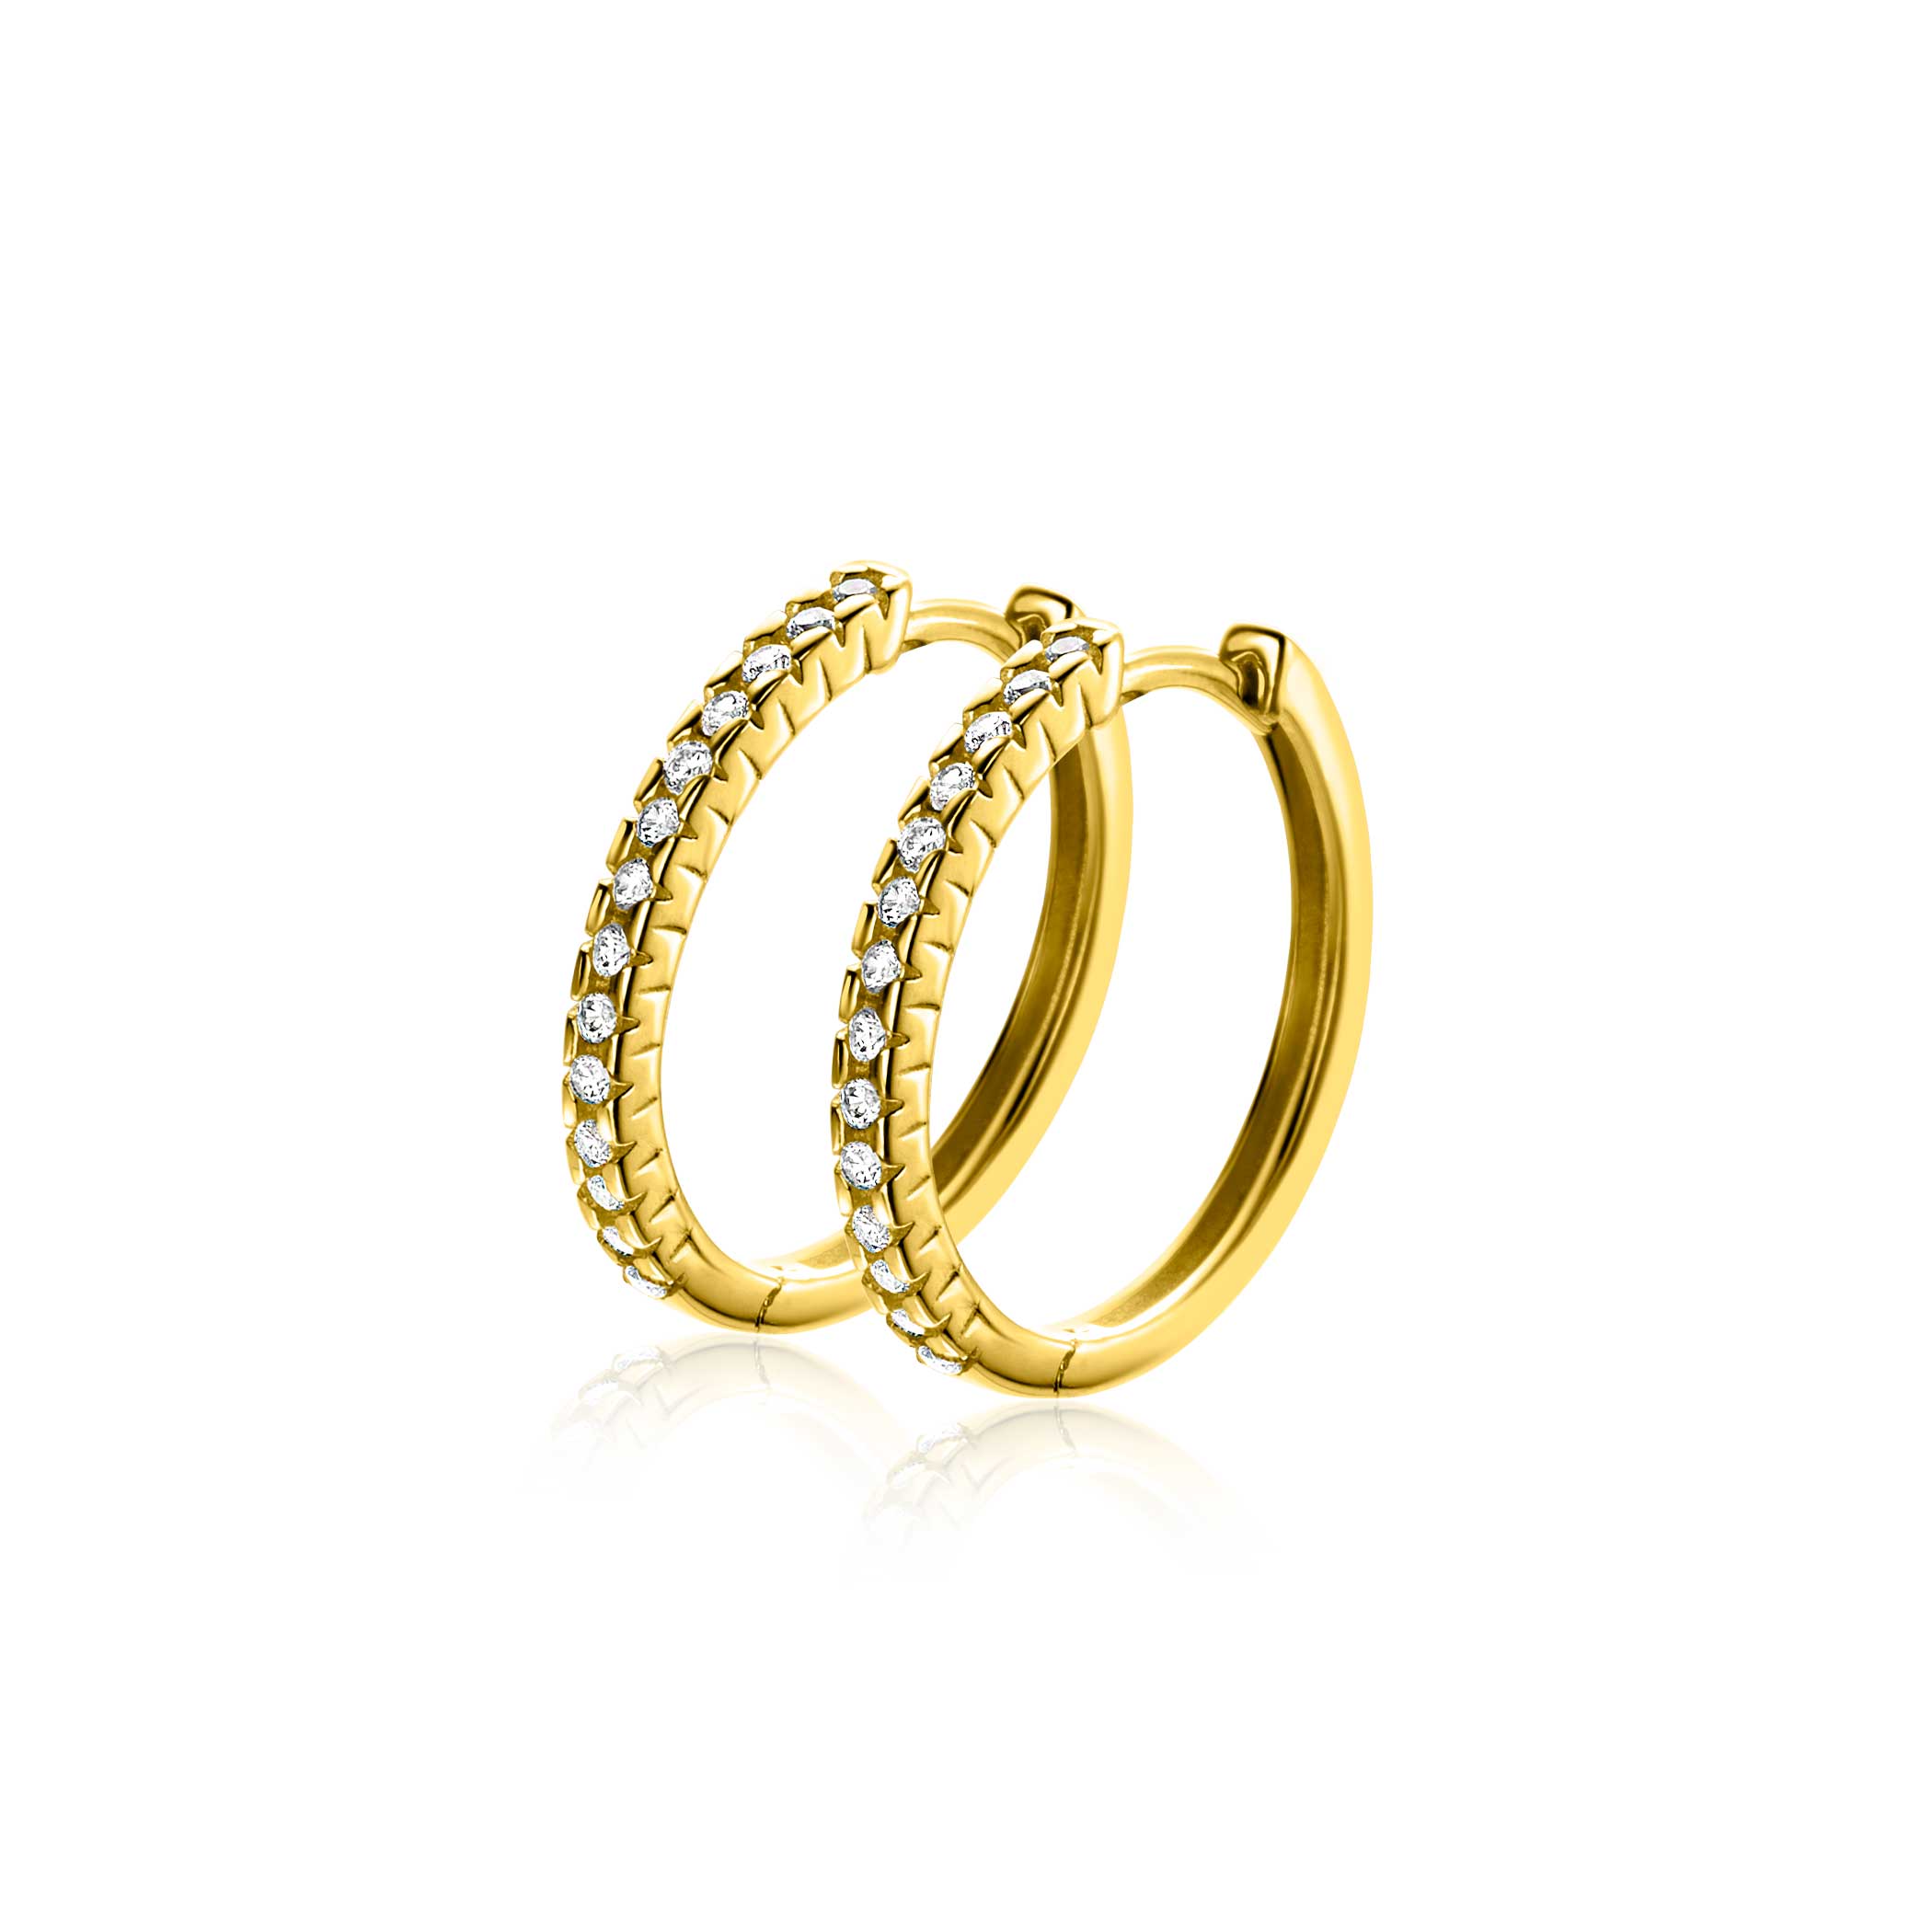 17mm ZINZI Gold 14 karat gold hoop earrings set with white zirconia stones and luxurious hinged closure 17mm x 1.7mm square tube ZGO506
